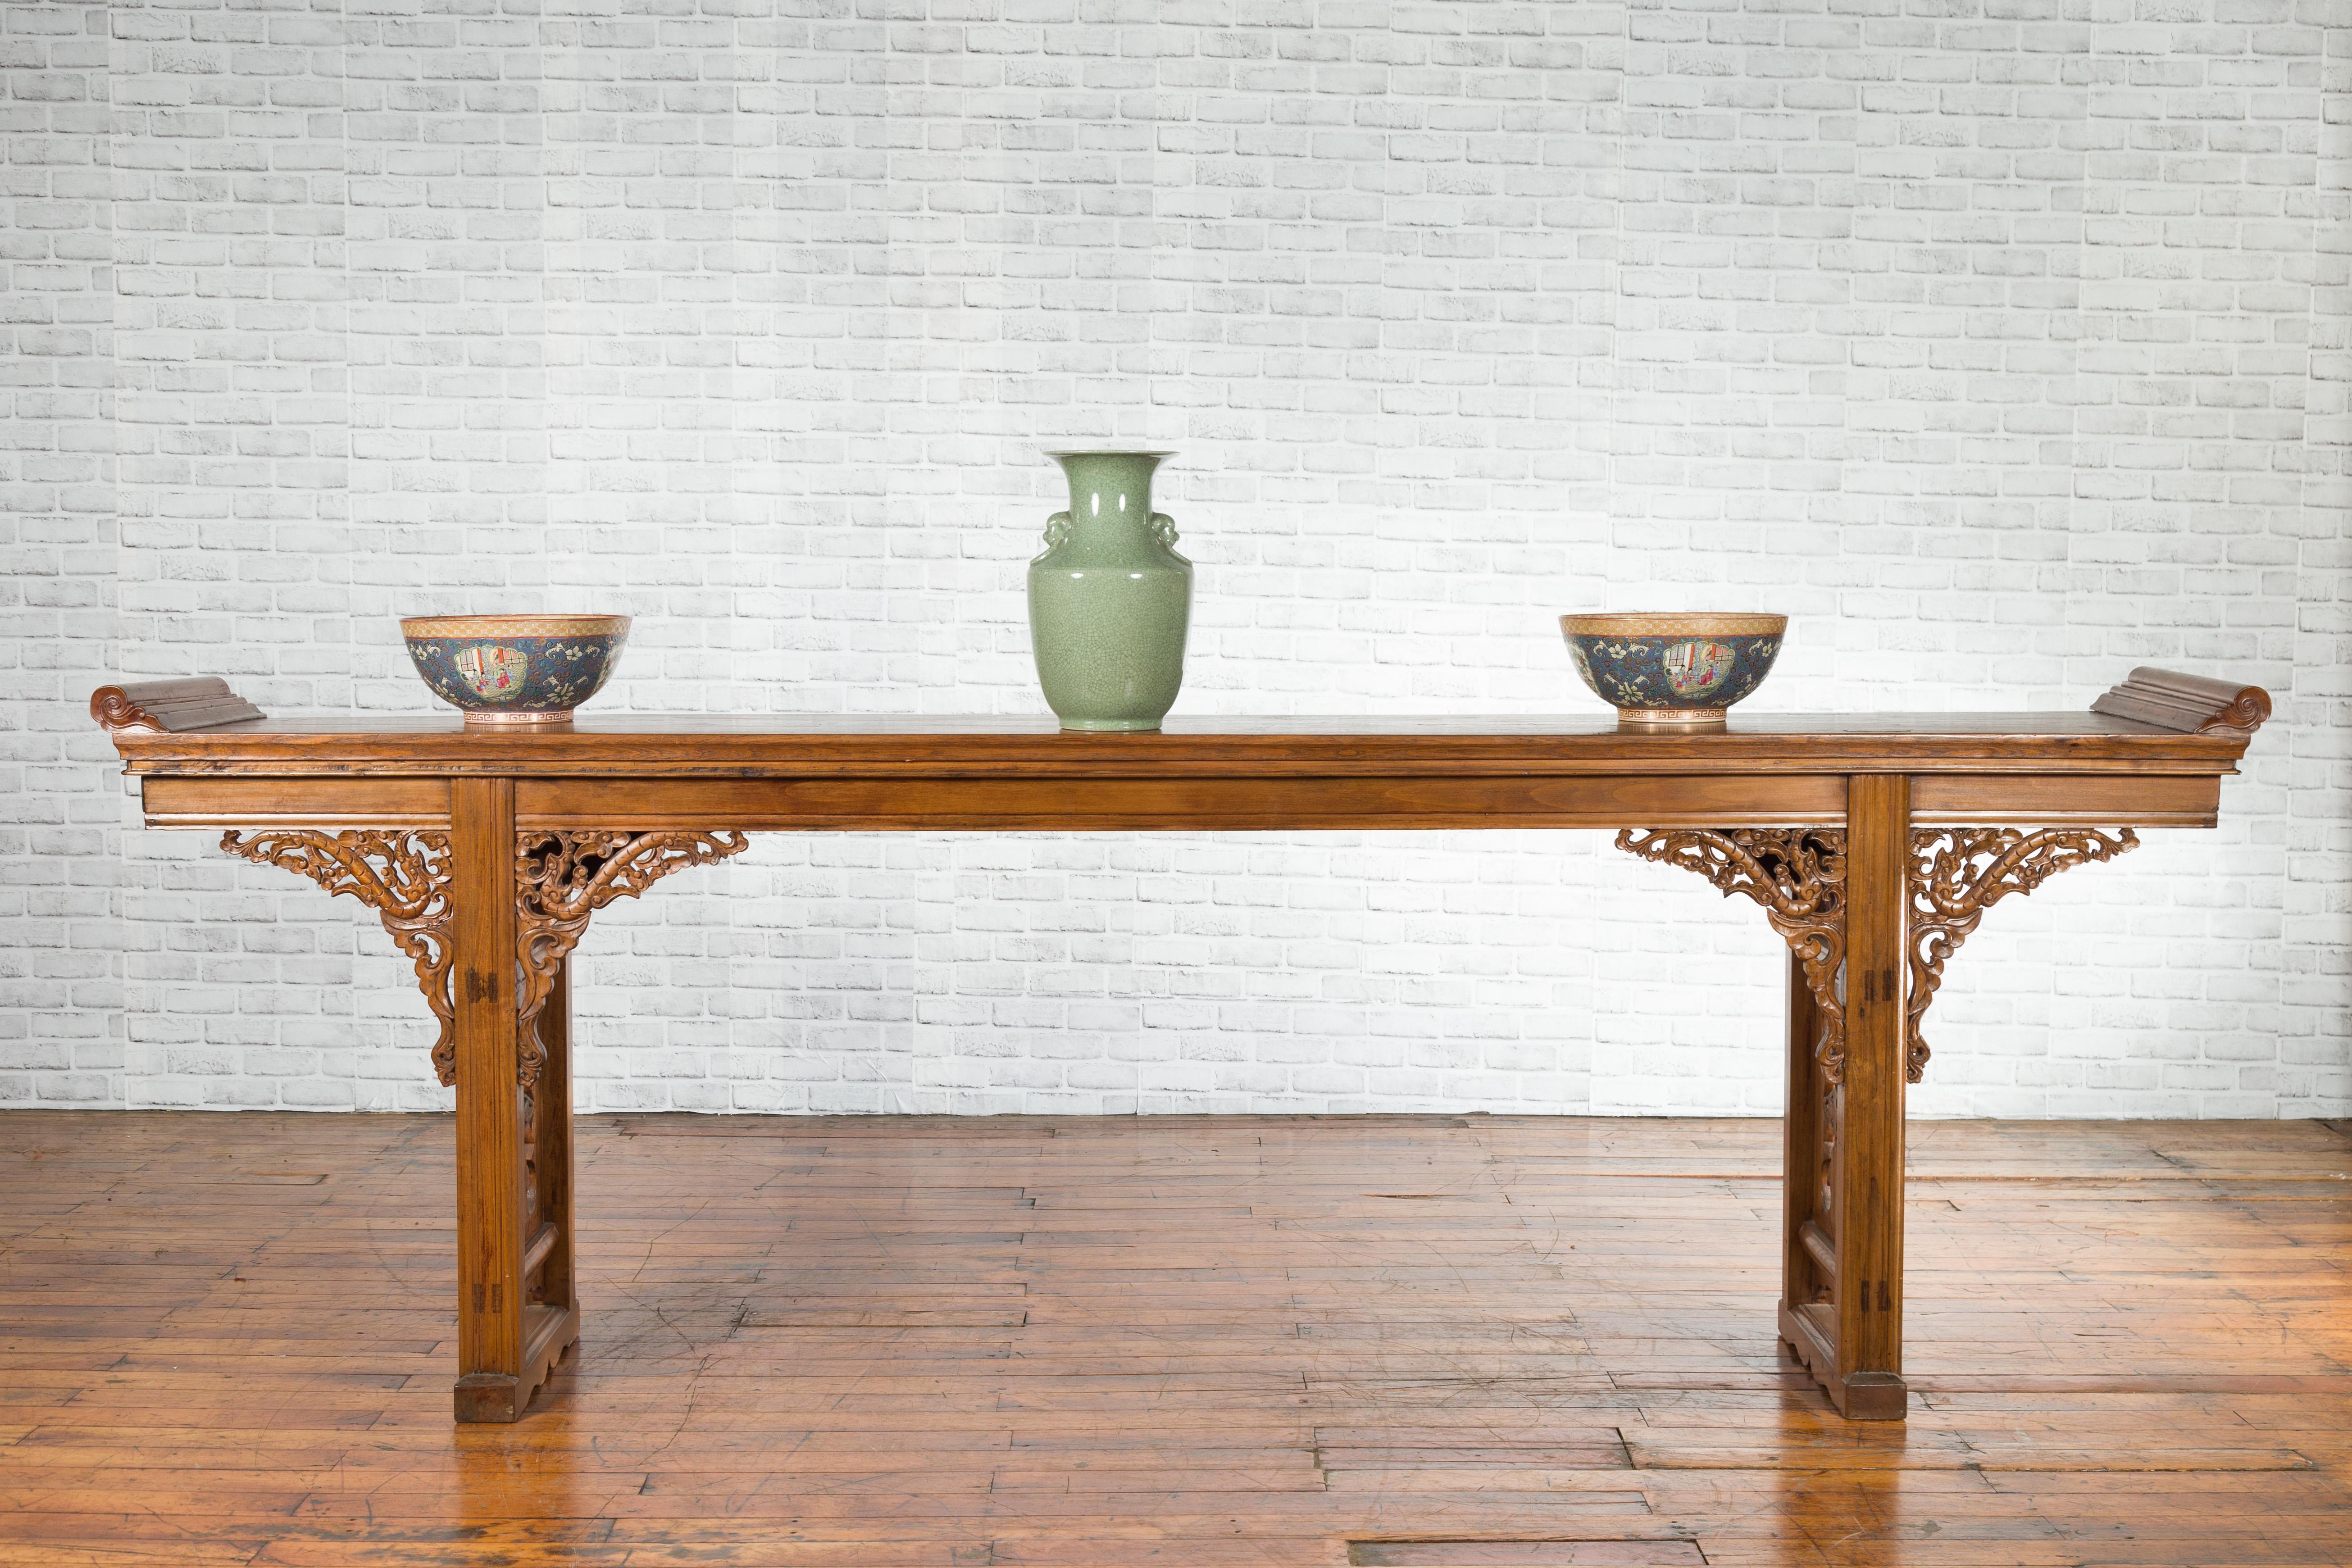 A Chinese early 20th century long elm altar console table from the Shandong province, with carved dragon motifs. Created in the Eastern province of Shandong during the early years of the 20th century, this long elm console table features a single